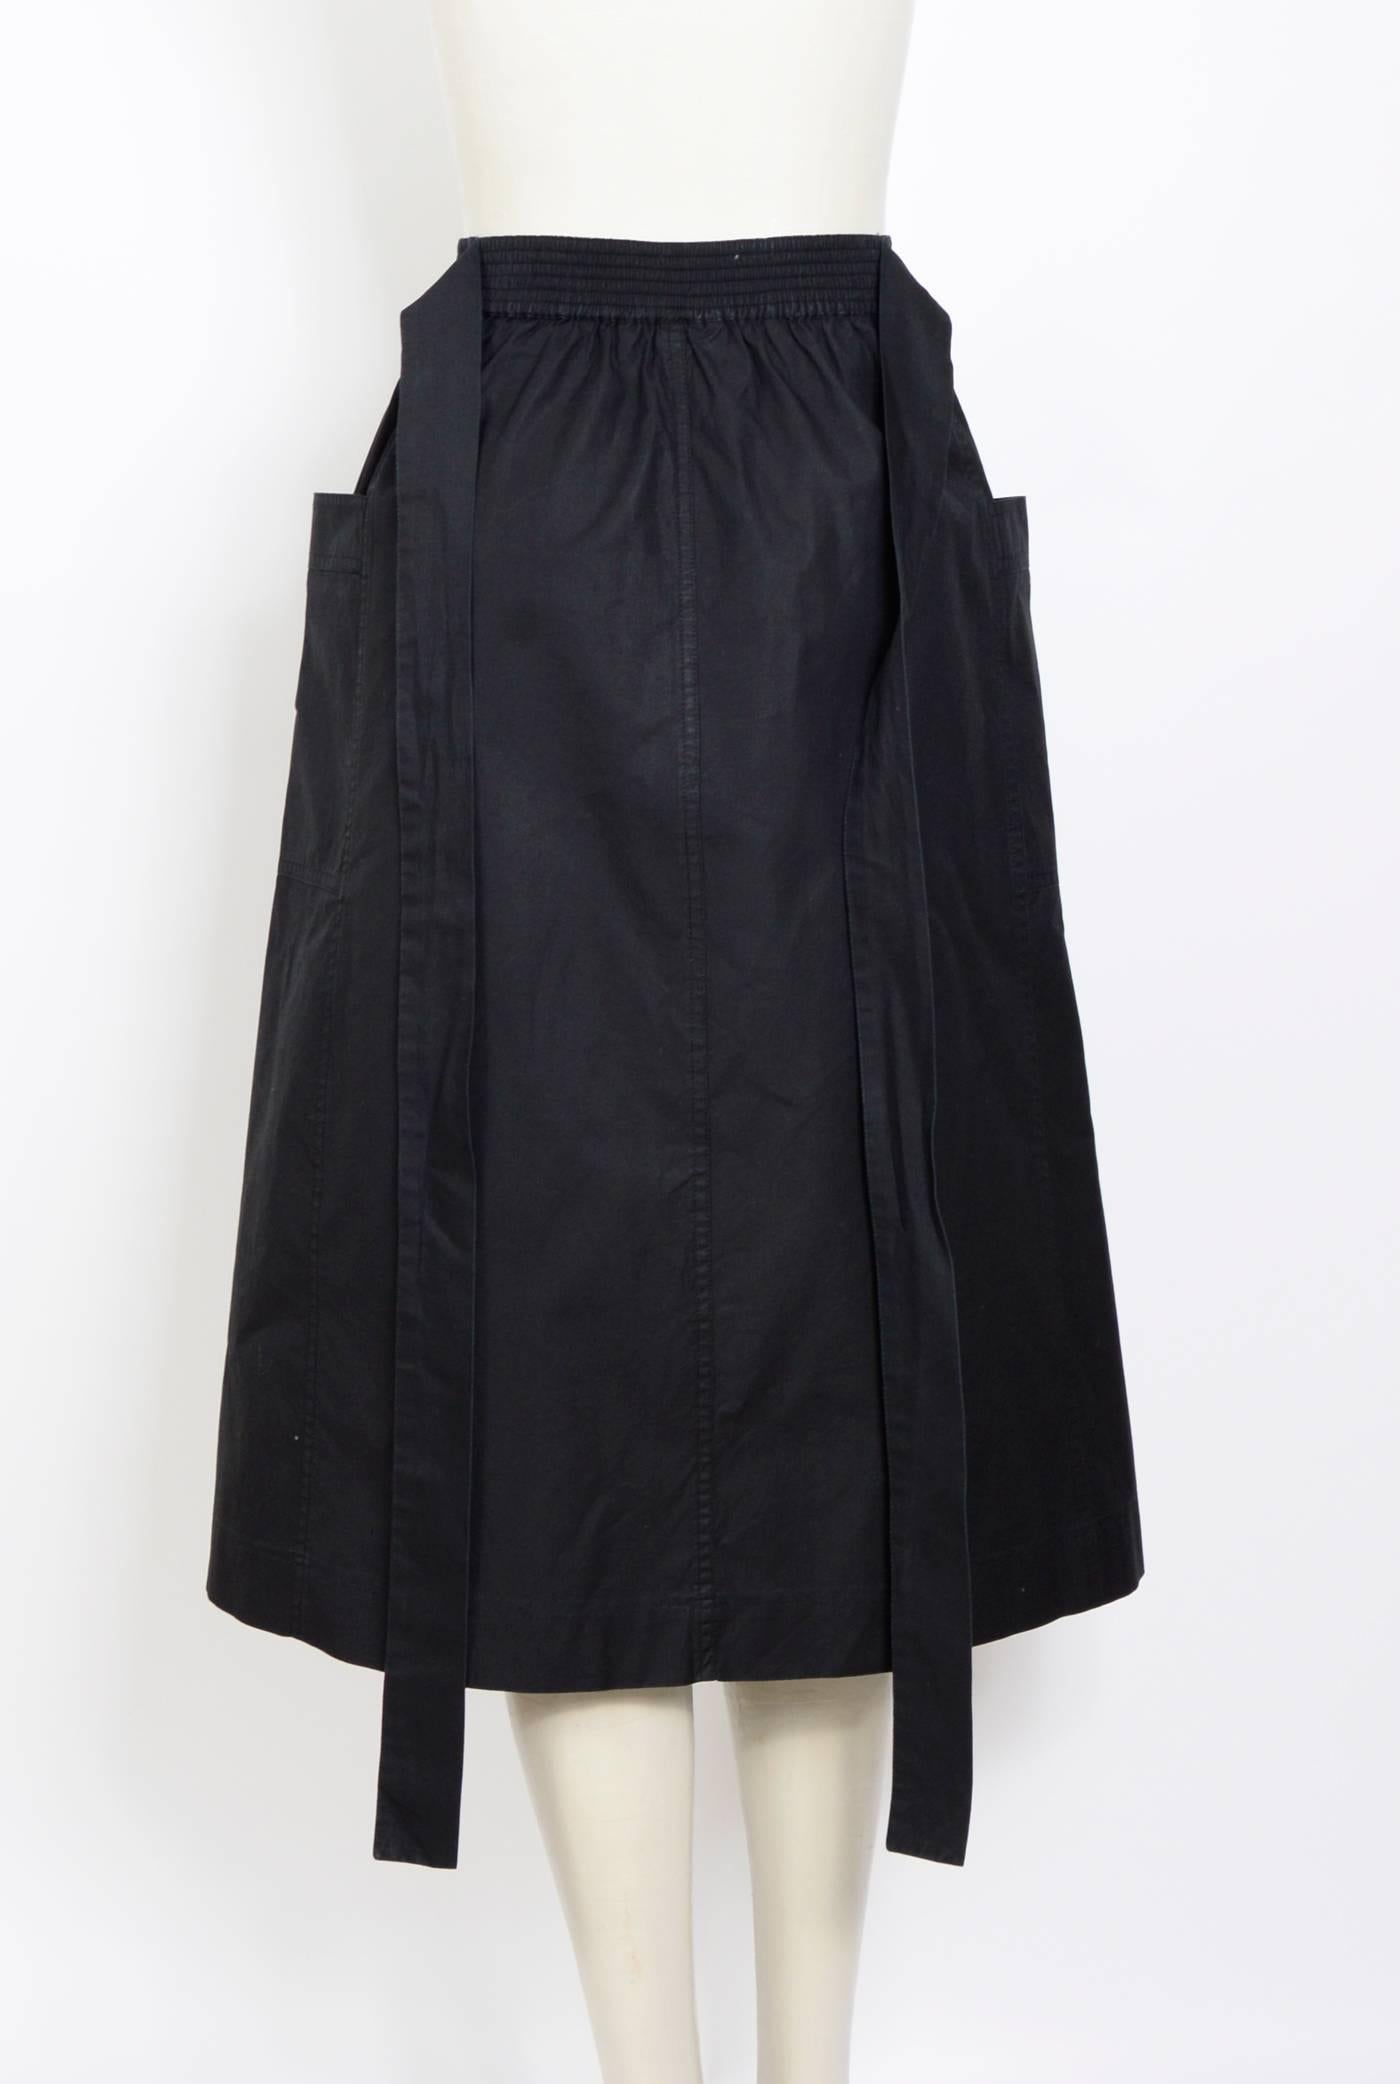 Yves Saint Laurent cotton black skirt, 1970's In Excellent Condition In Antwerp, BE